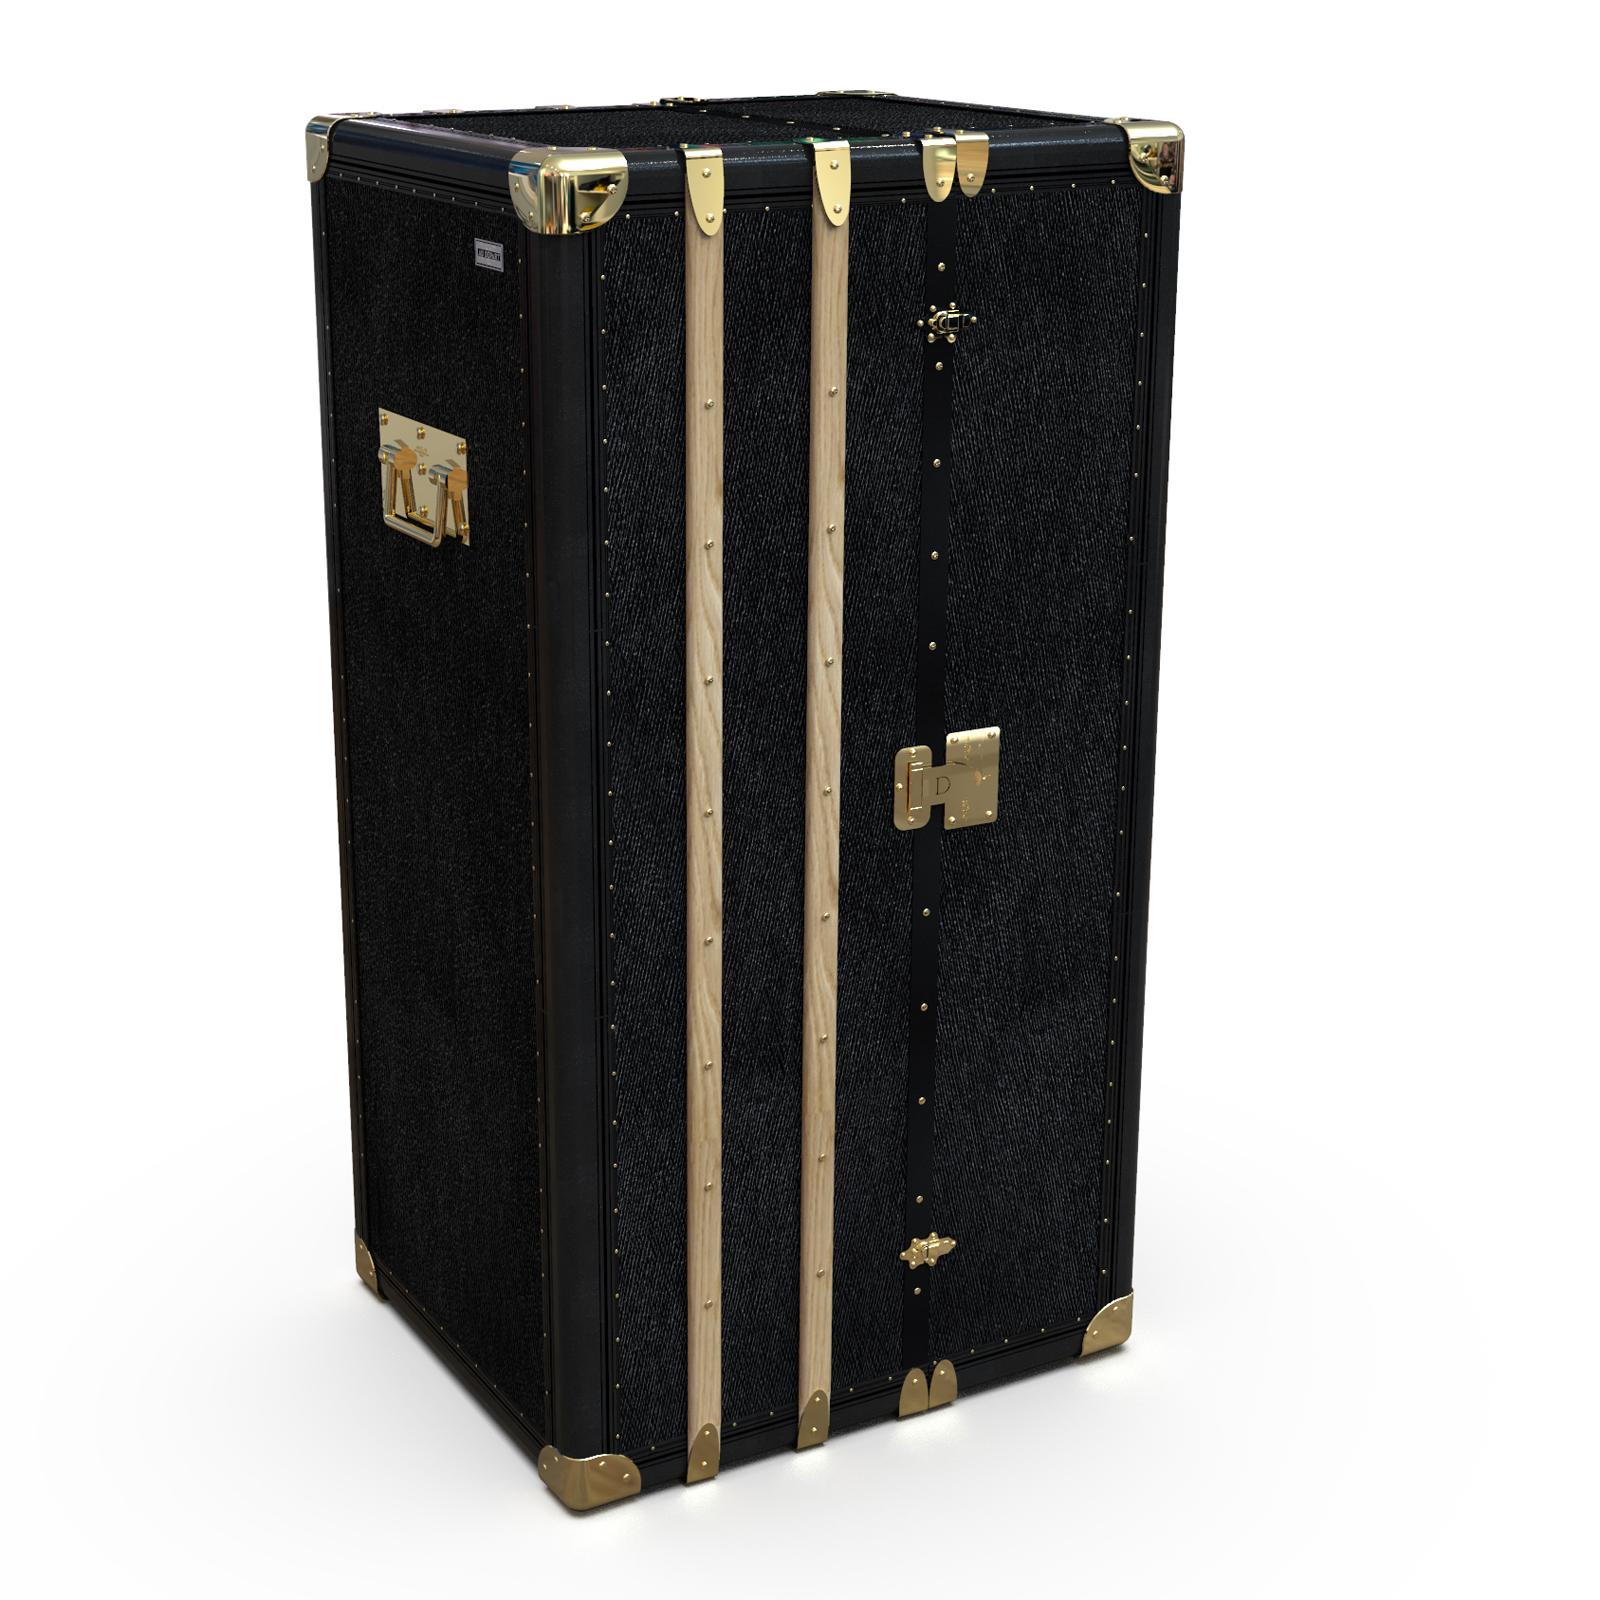 This versatile trunk exudes retro-chic charm and sophistication, while also being a generous storage space to transport and display vinyls. It is part of the Music & Games Collection and is the ultimate addition to an Lp lover's collection. It